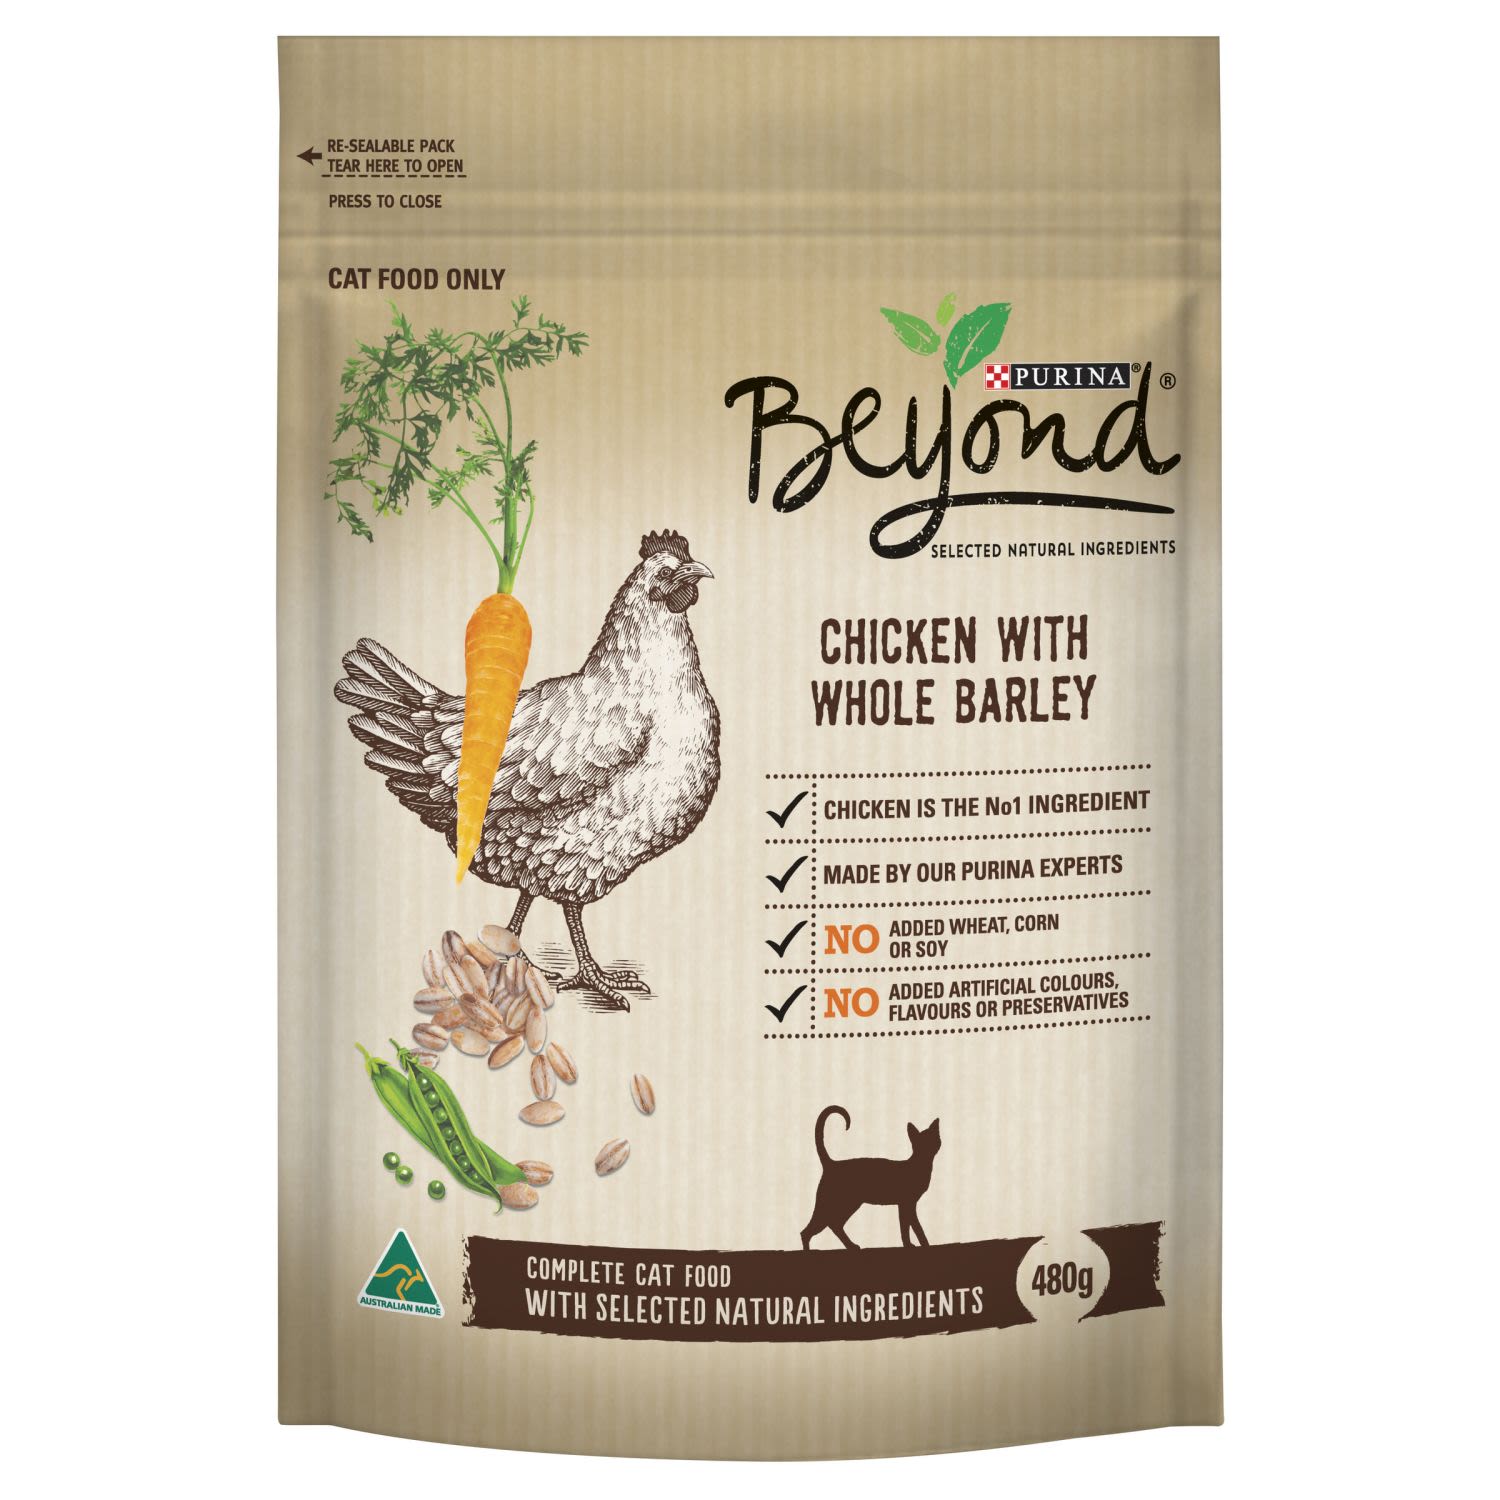 Beyond Cat Food Chicken with Whole Barley, 480 Gram